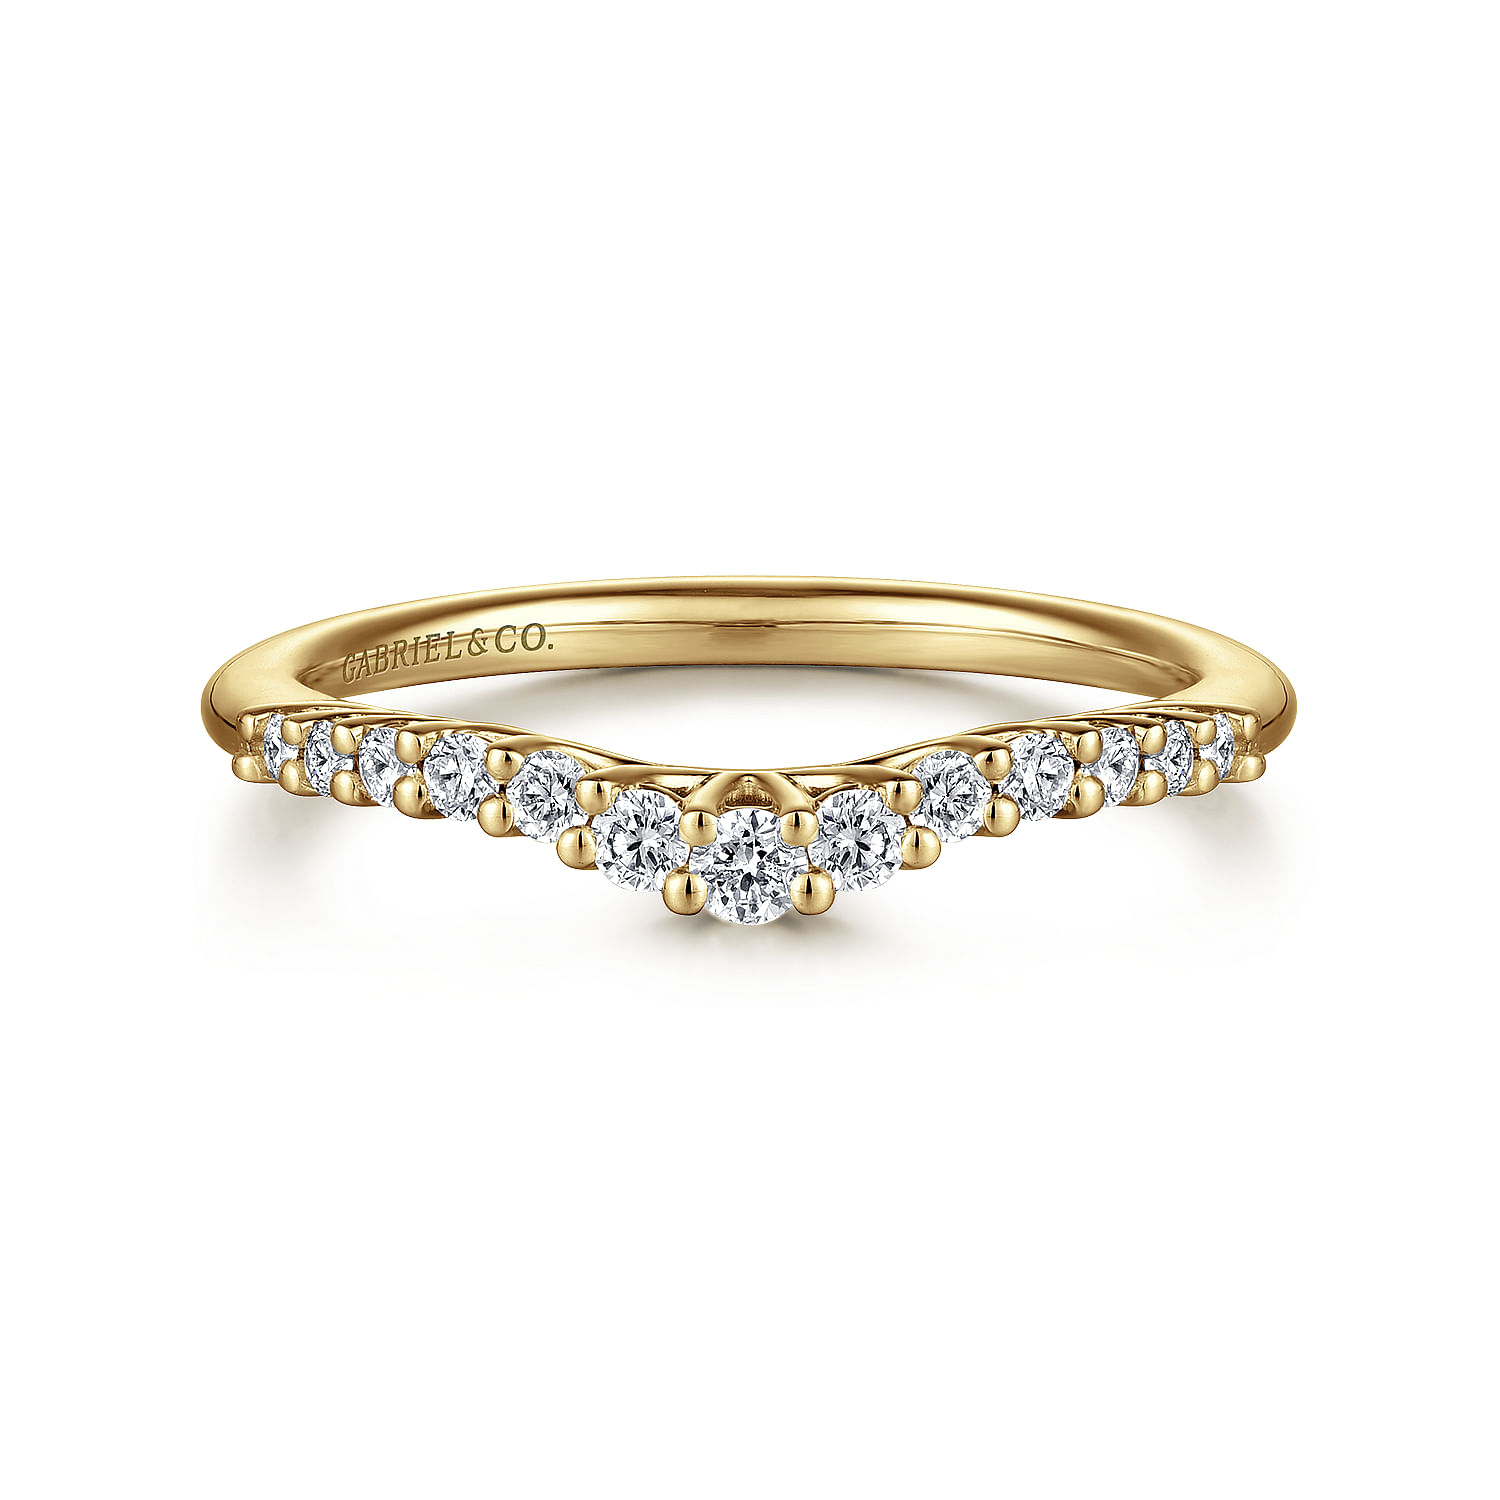 Curved 14K Yellow Gold Shared Prong Diamond Wedding Band